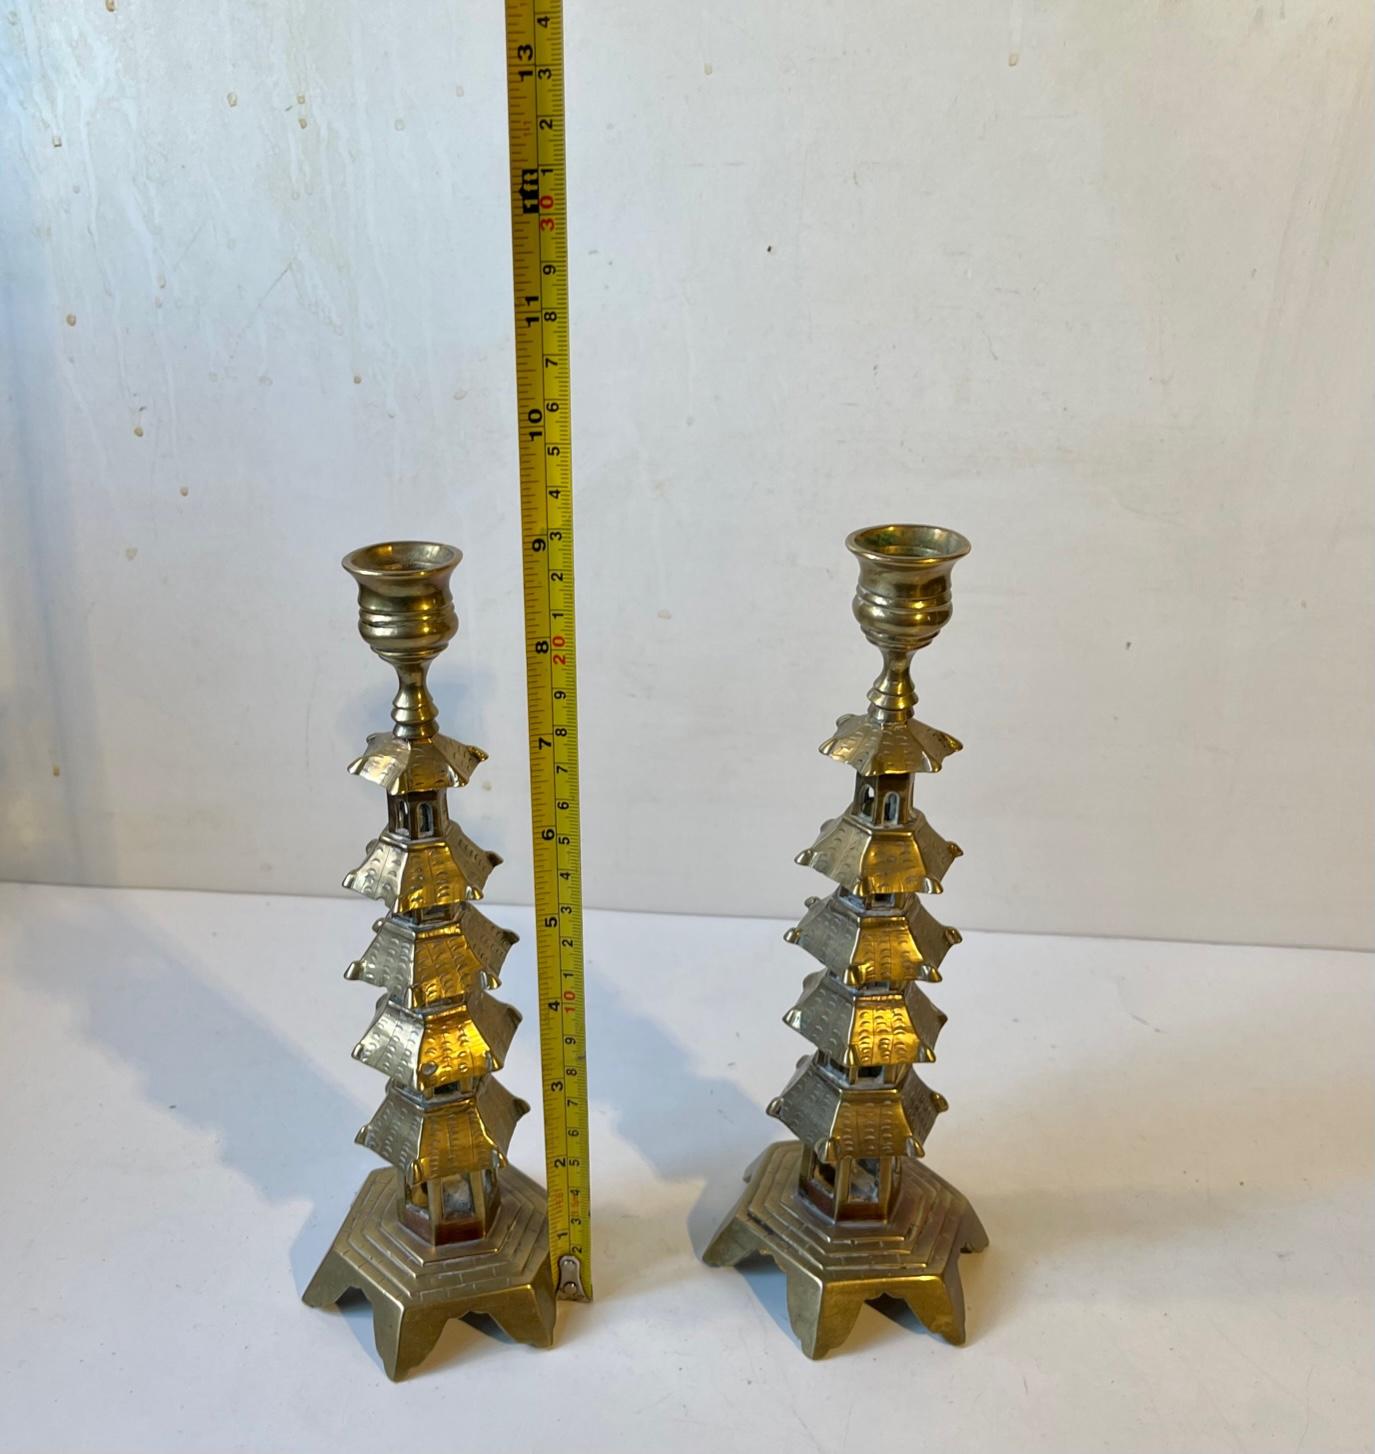 Pair of Old Chinese Pagoda Candlesticks in Brass In Good Condition For Sale In Esbjerg, DK